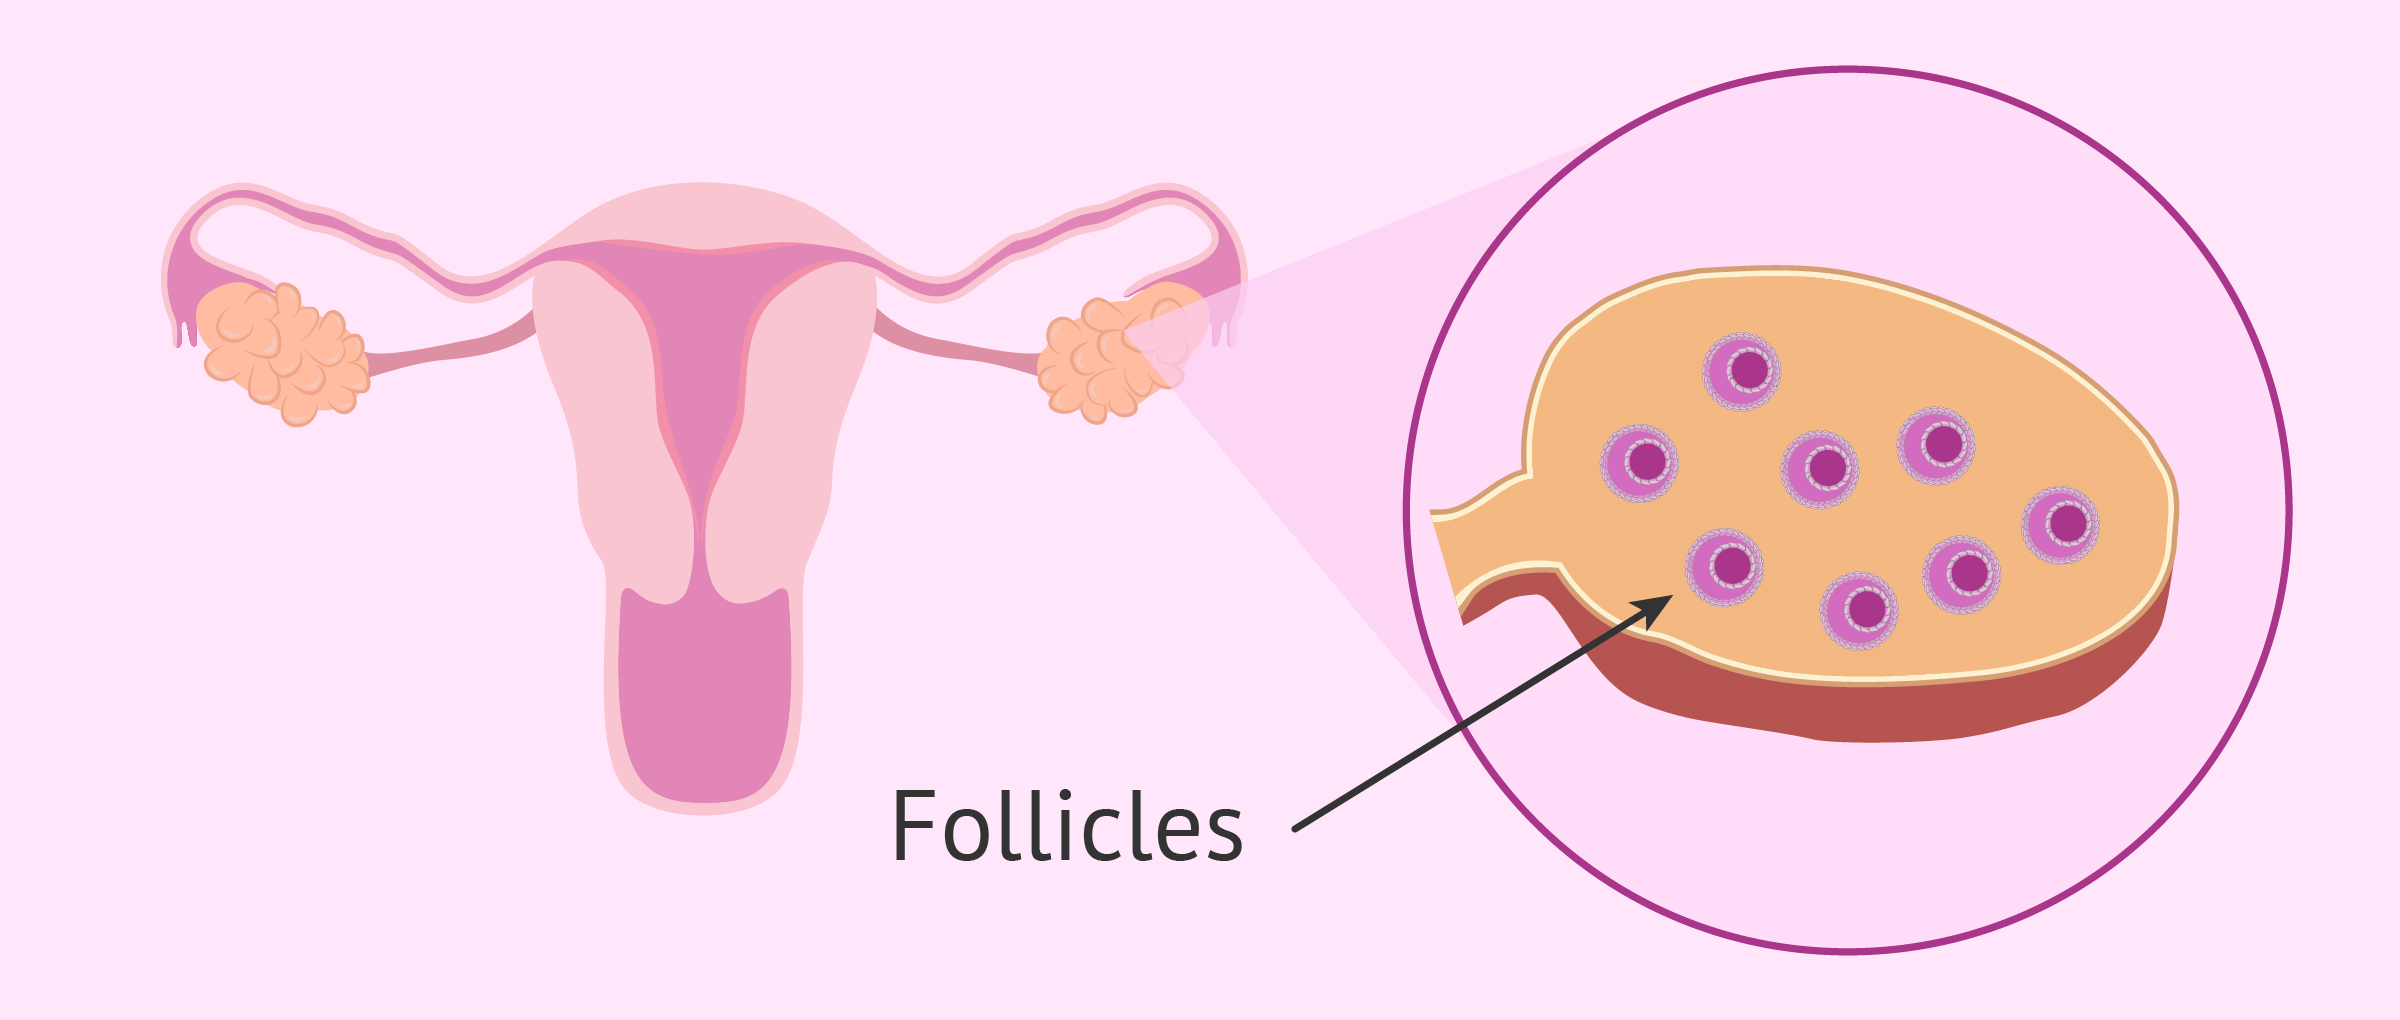 Definition of polycystic ovary